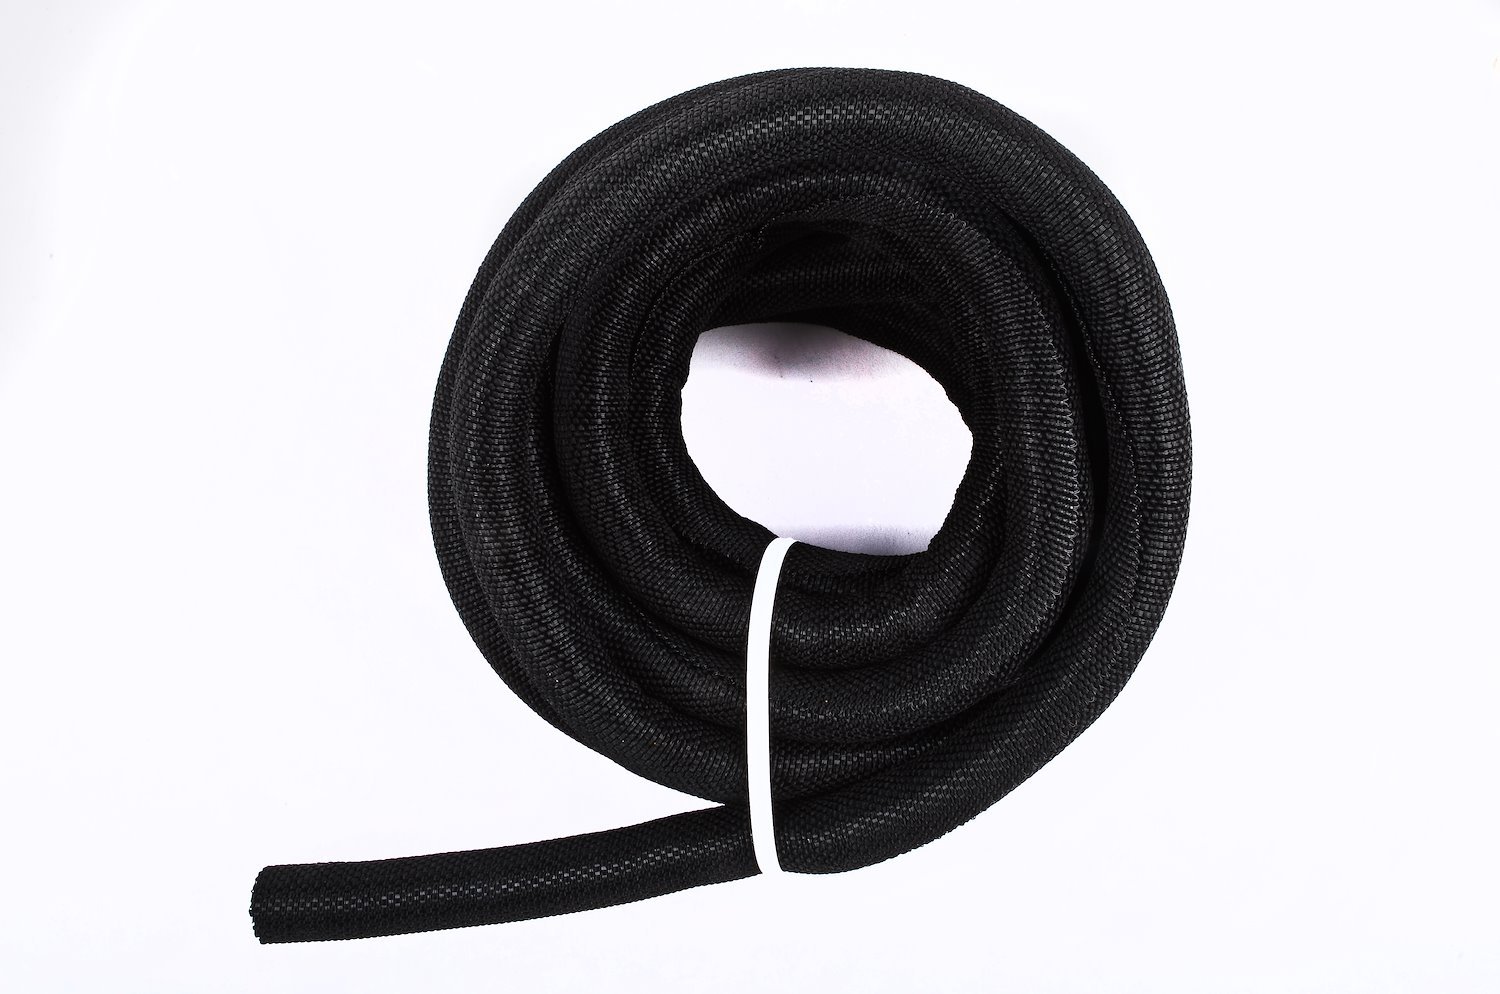 Classic Wire Harness and Hose Wrap 1/2 in. diameter x 10 ft.